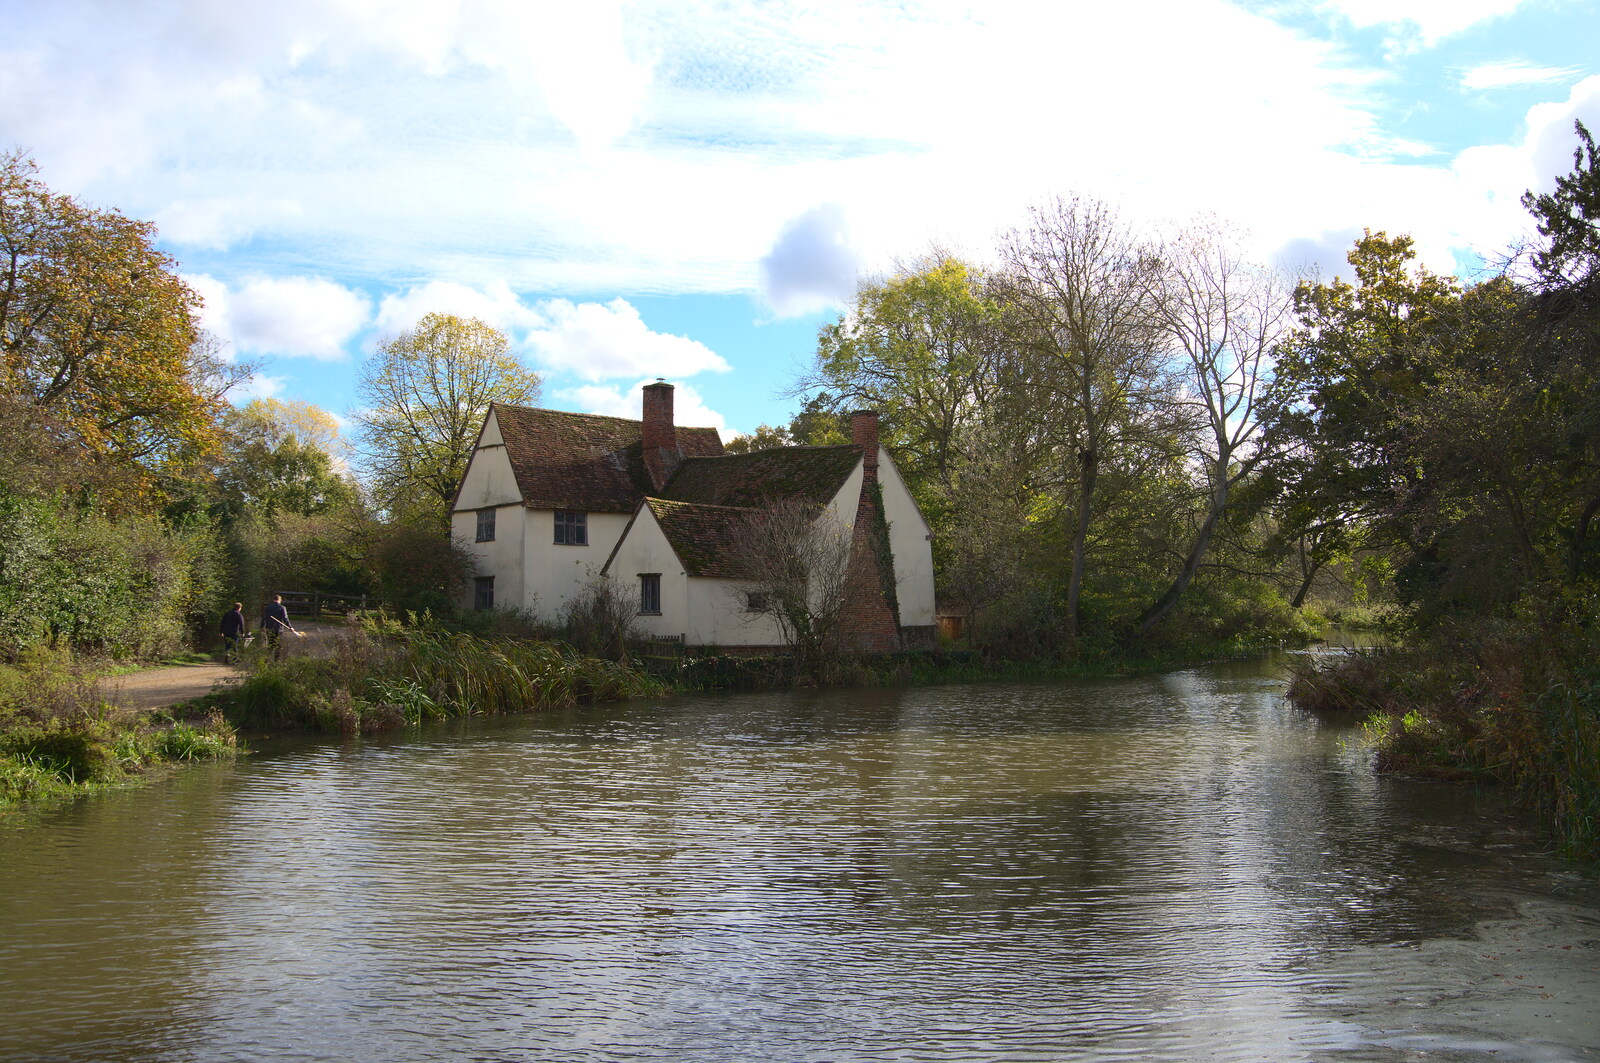 A Postcard from Flatford and Dedham, Suffolk and Essex, 9th November 2022: Another view of Willy Lott's cottage